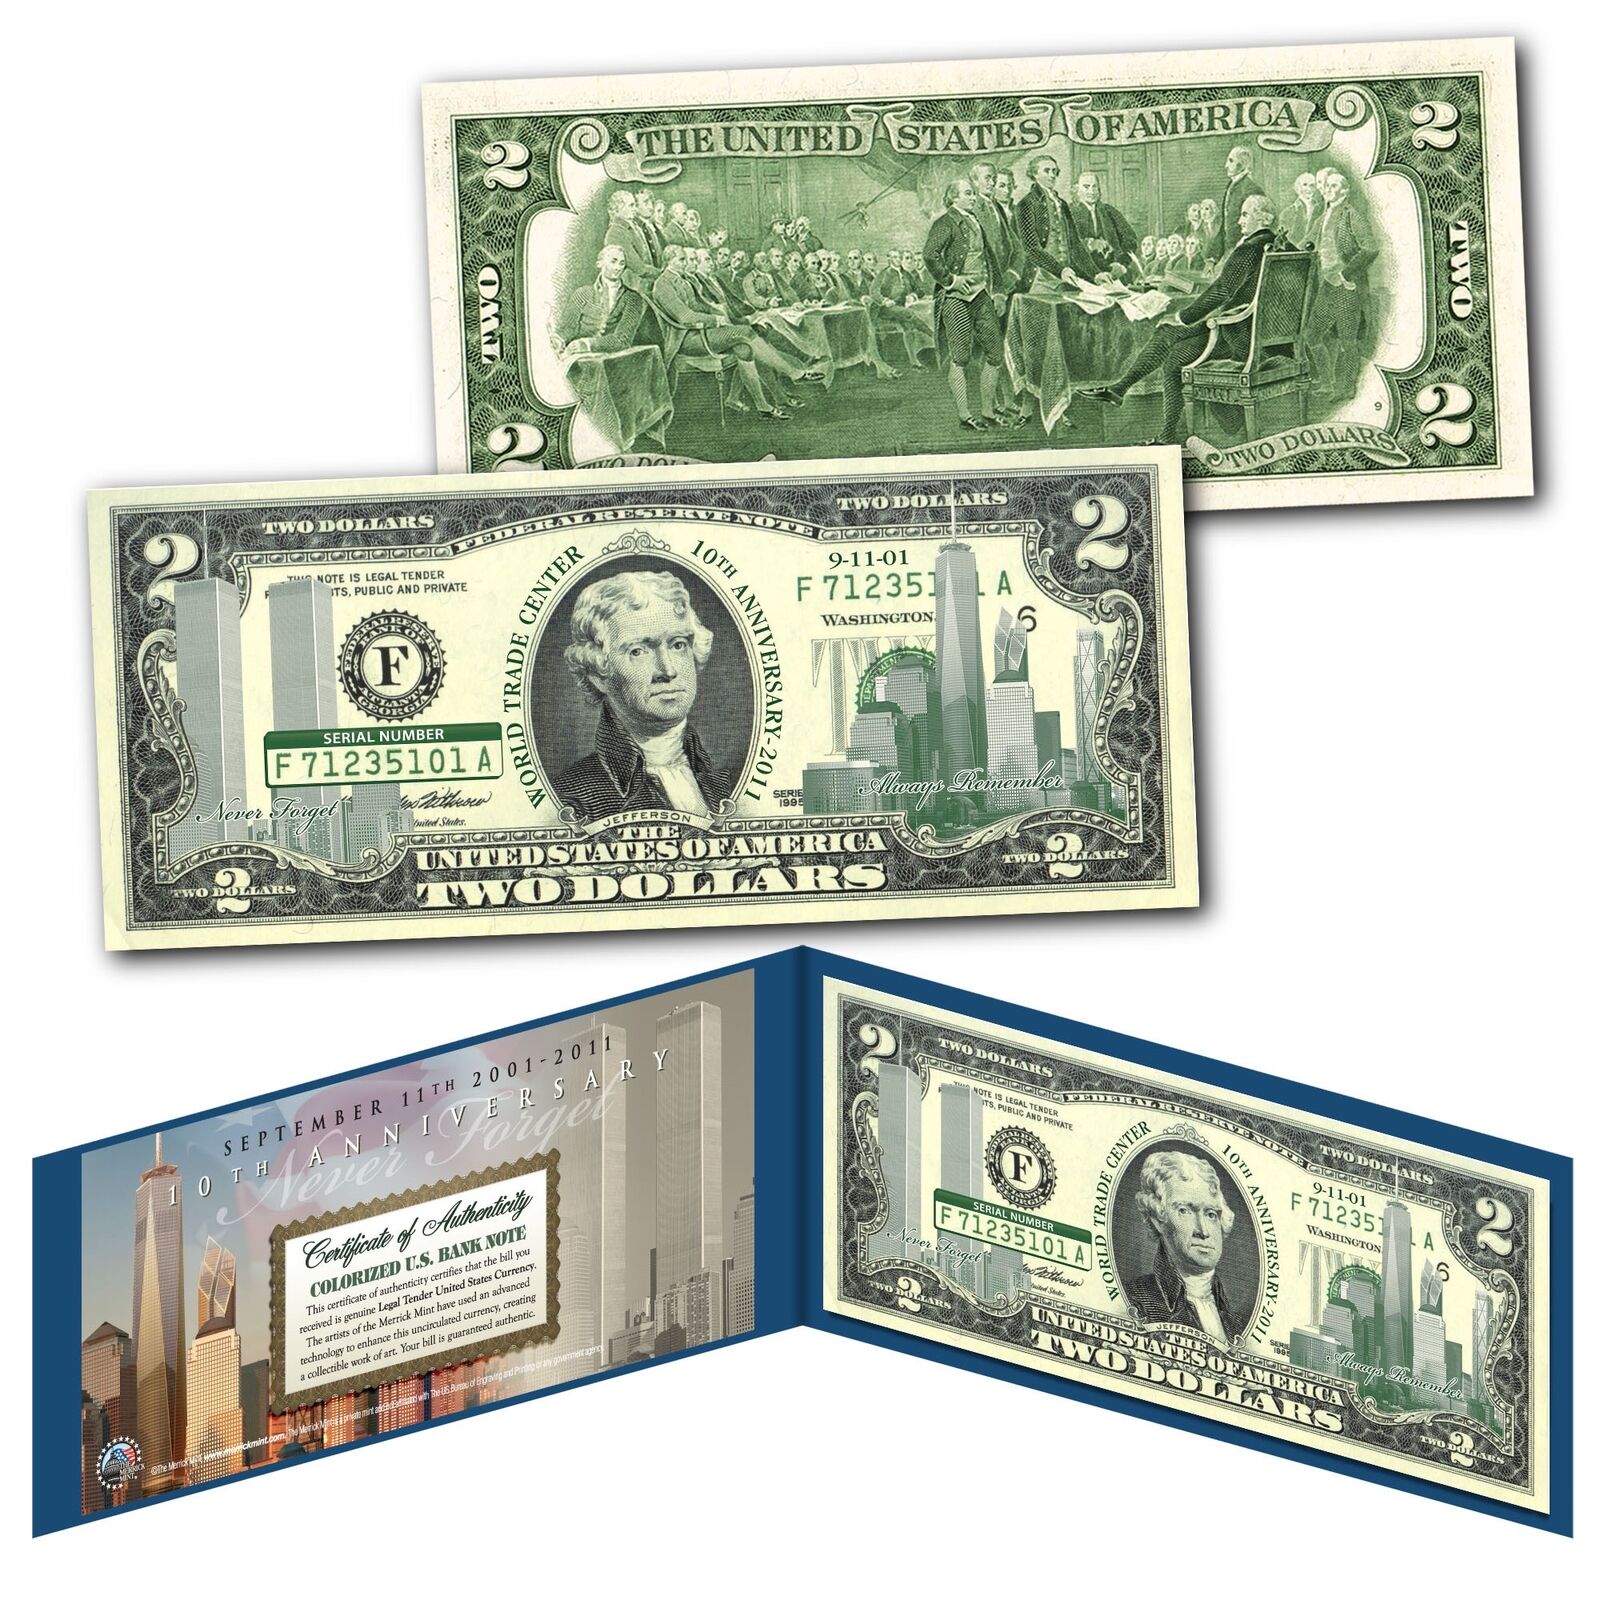 WORLD TRADE CENTER 9/11 * 10th Anniversary * $2 US Bill GRN - SPECIAL LOW PRICE